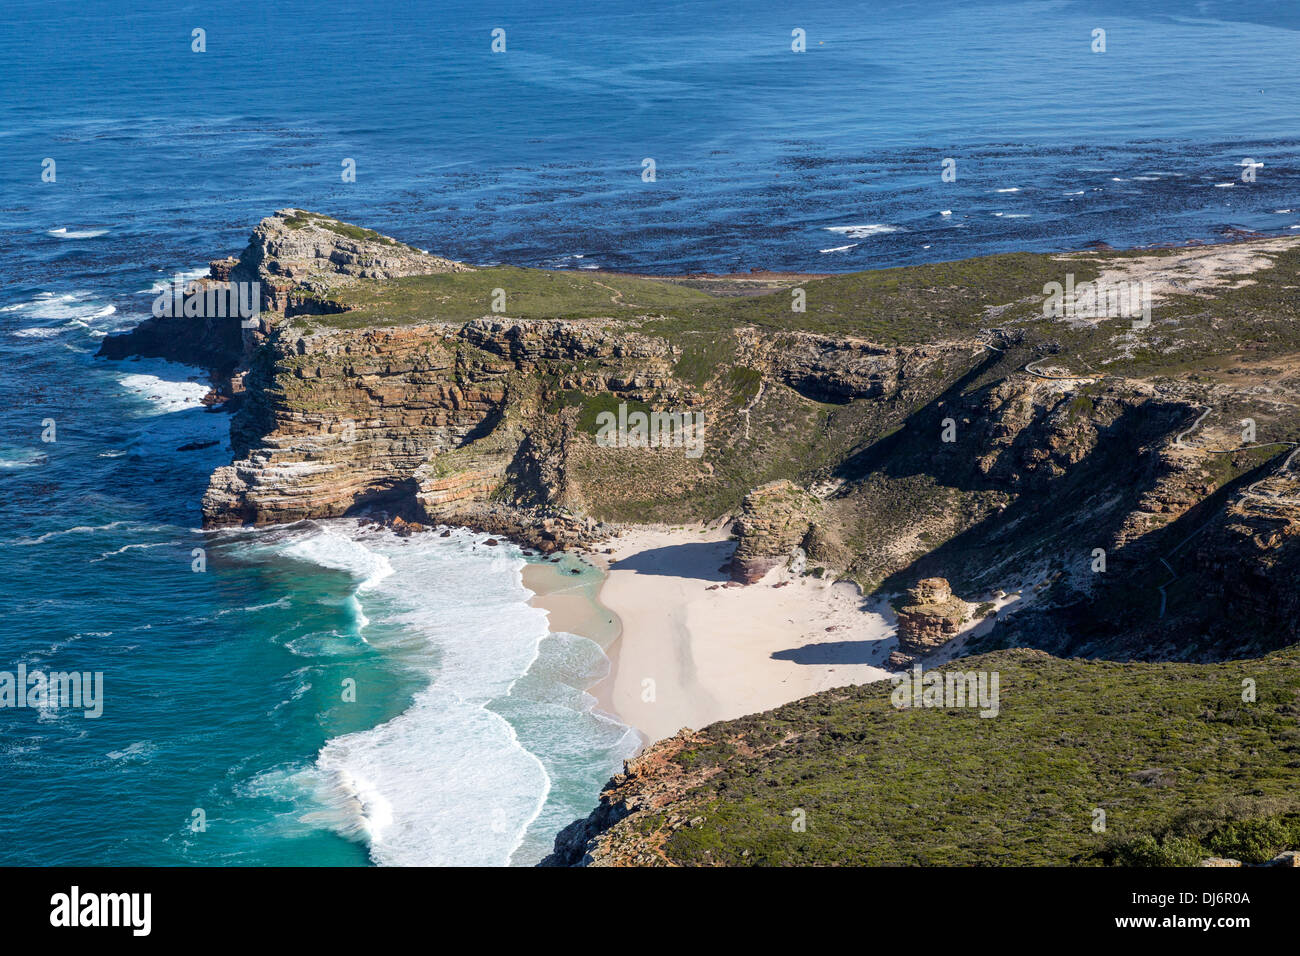 South Africa. Cape of Good Hope, Atlantic Ocean, seen from Cape Point. Stock Photo